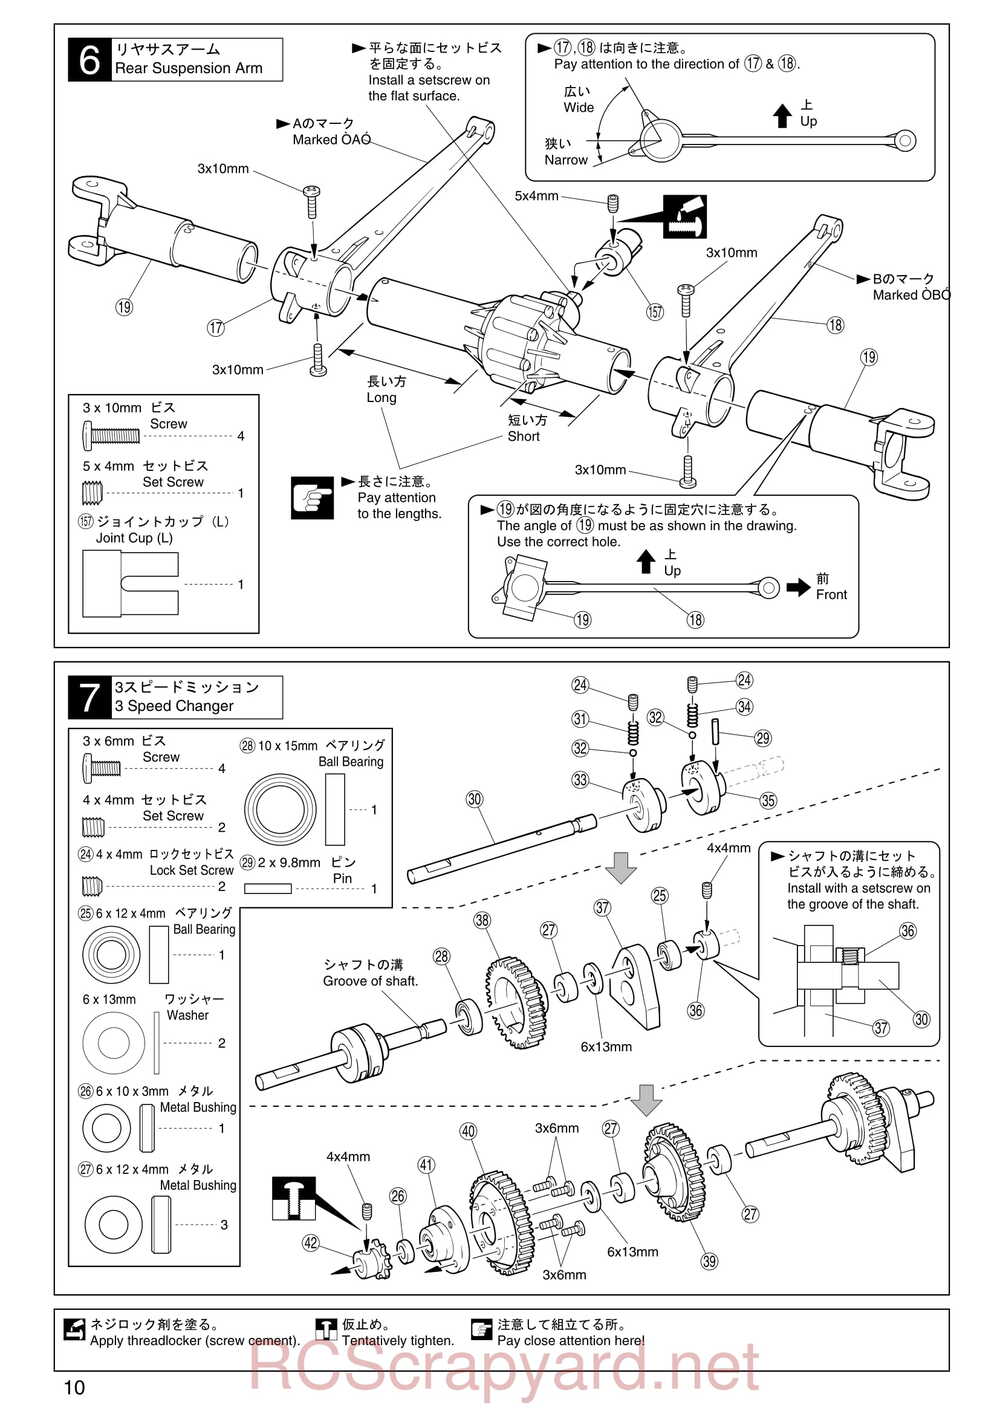 Kyosho - 31224 - Mad-Armour - Manual - Page 10